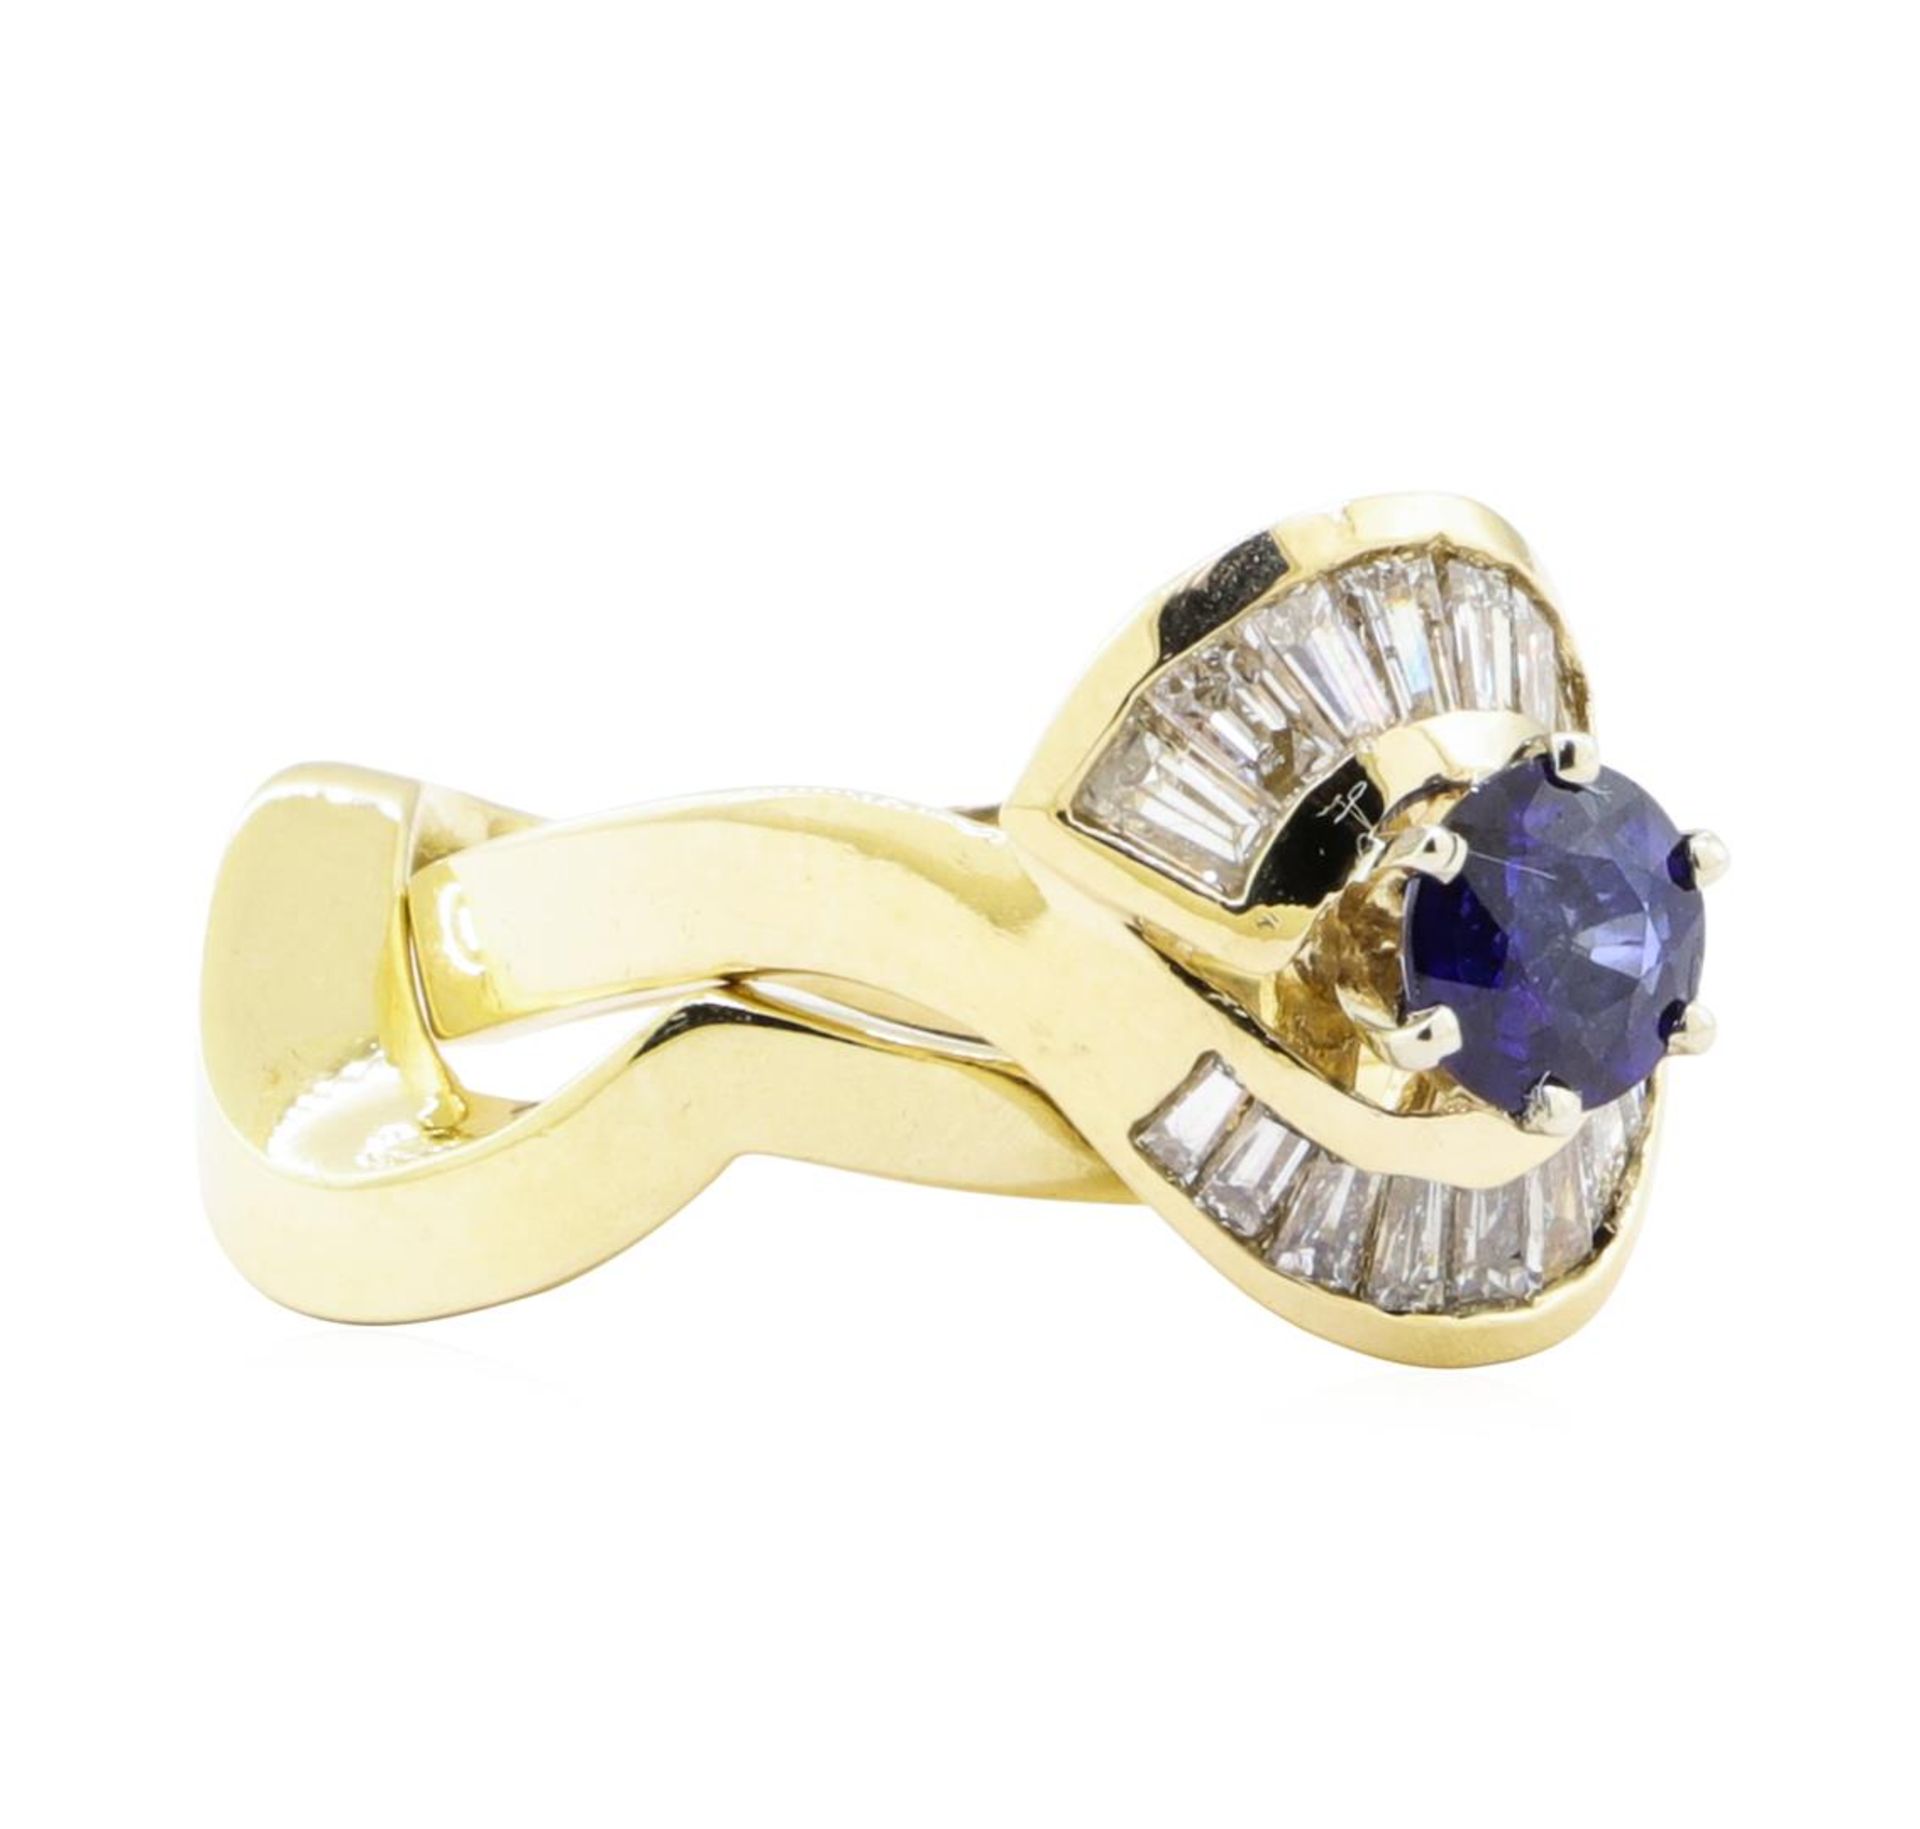 1.37 ctw Sapphire And Diamond Ring And Band - 14KT Yellow Gold - Image 4 of 5